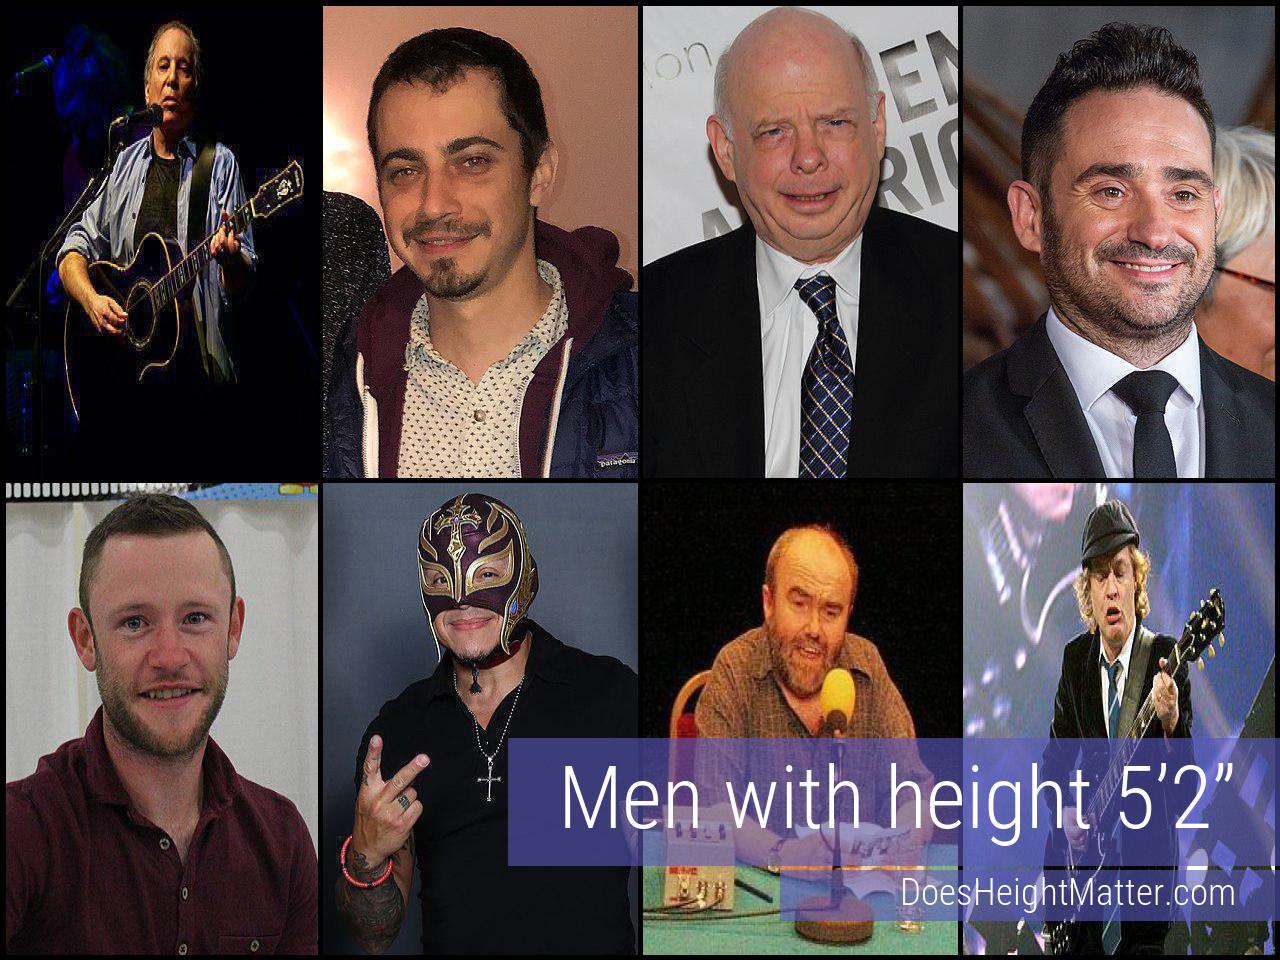 Male celebrities who are 5 ft 2